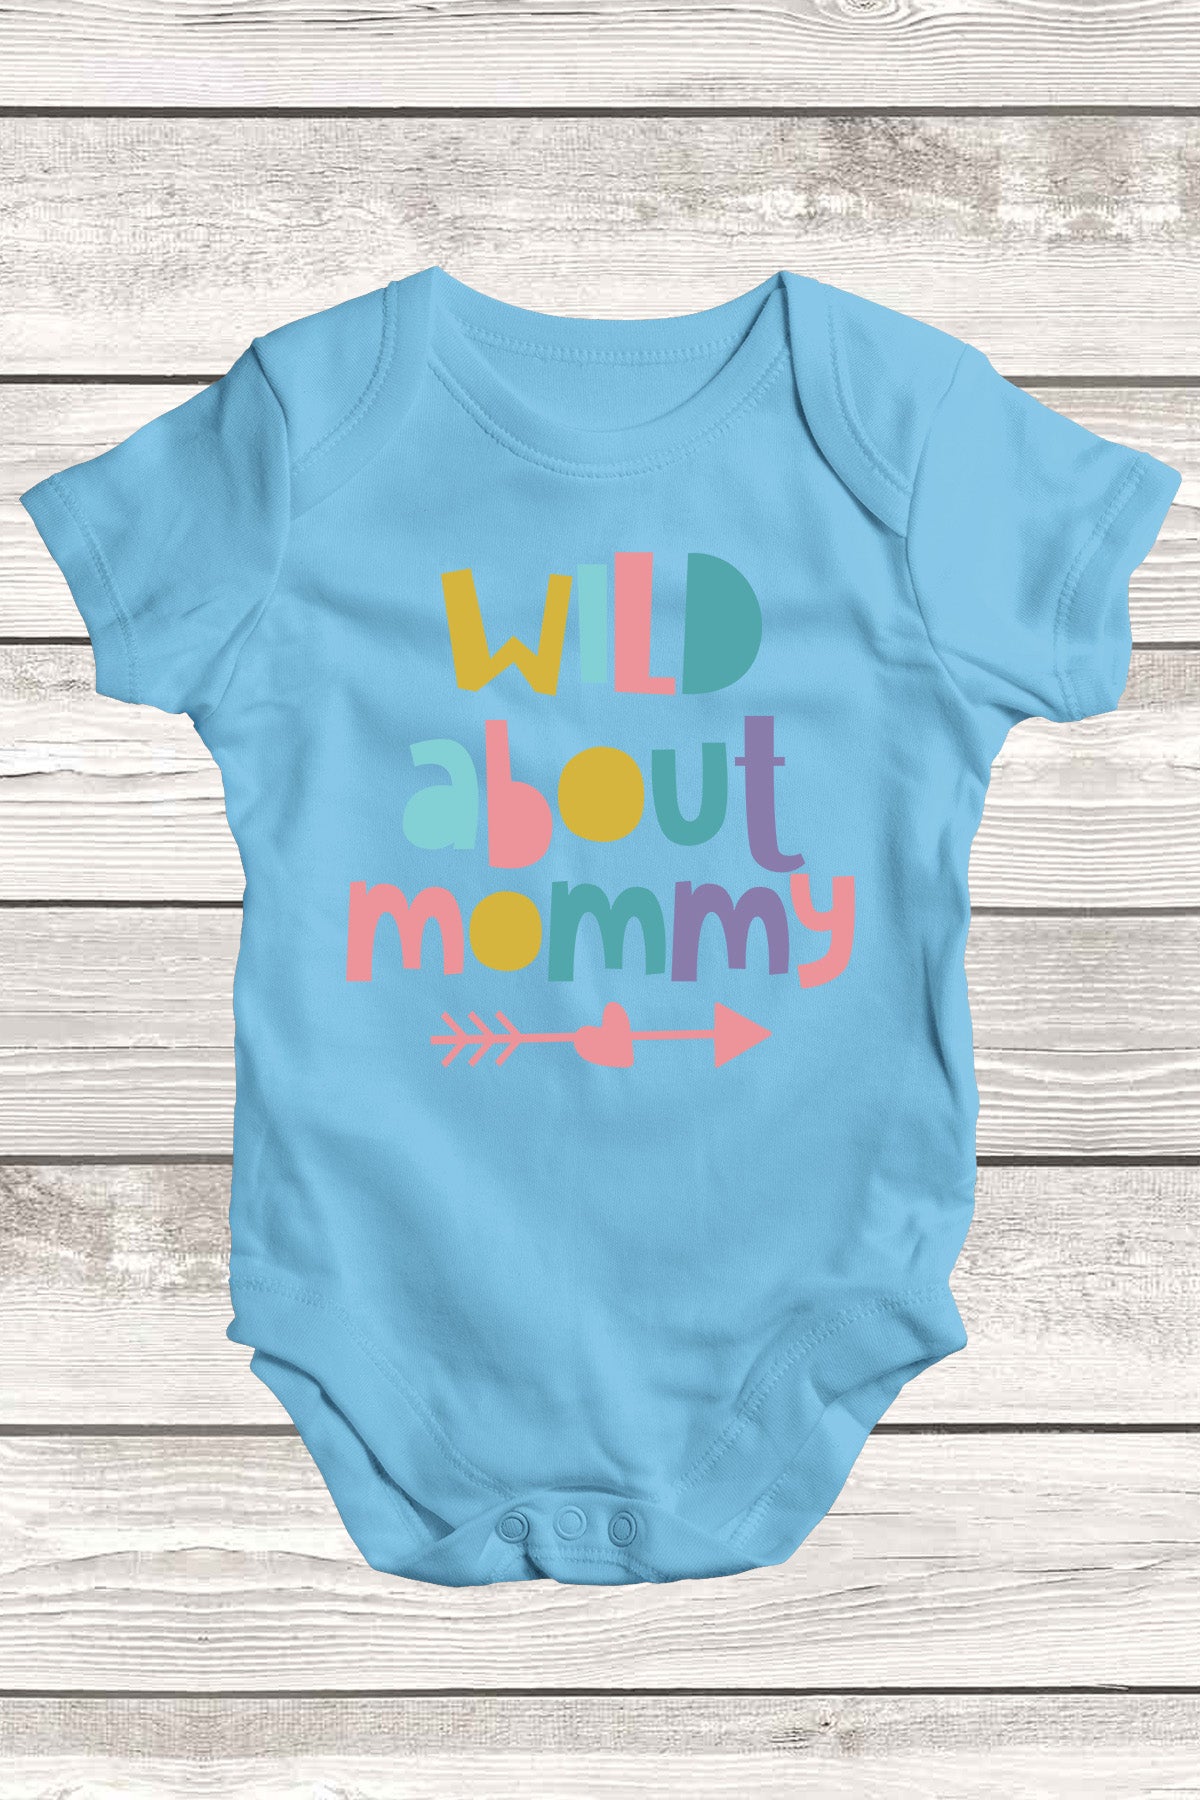 Wild About Mommy Baby Bodysuit